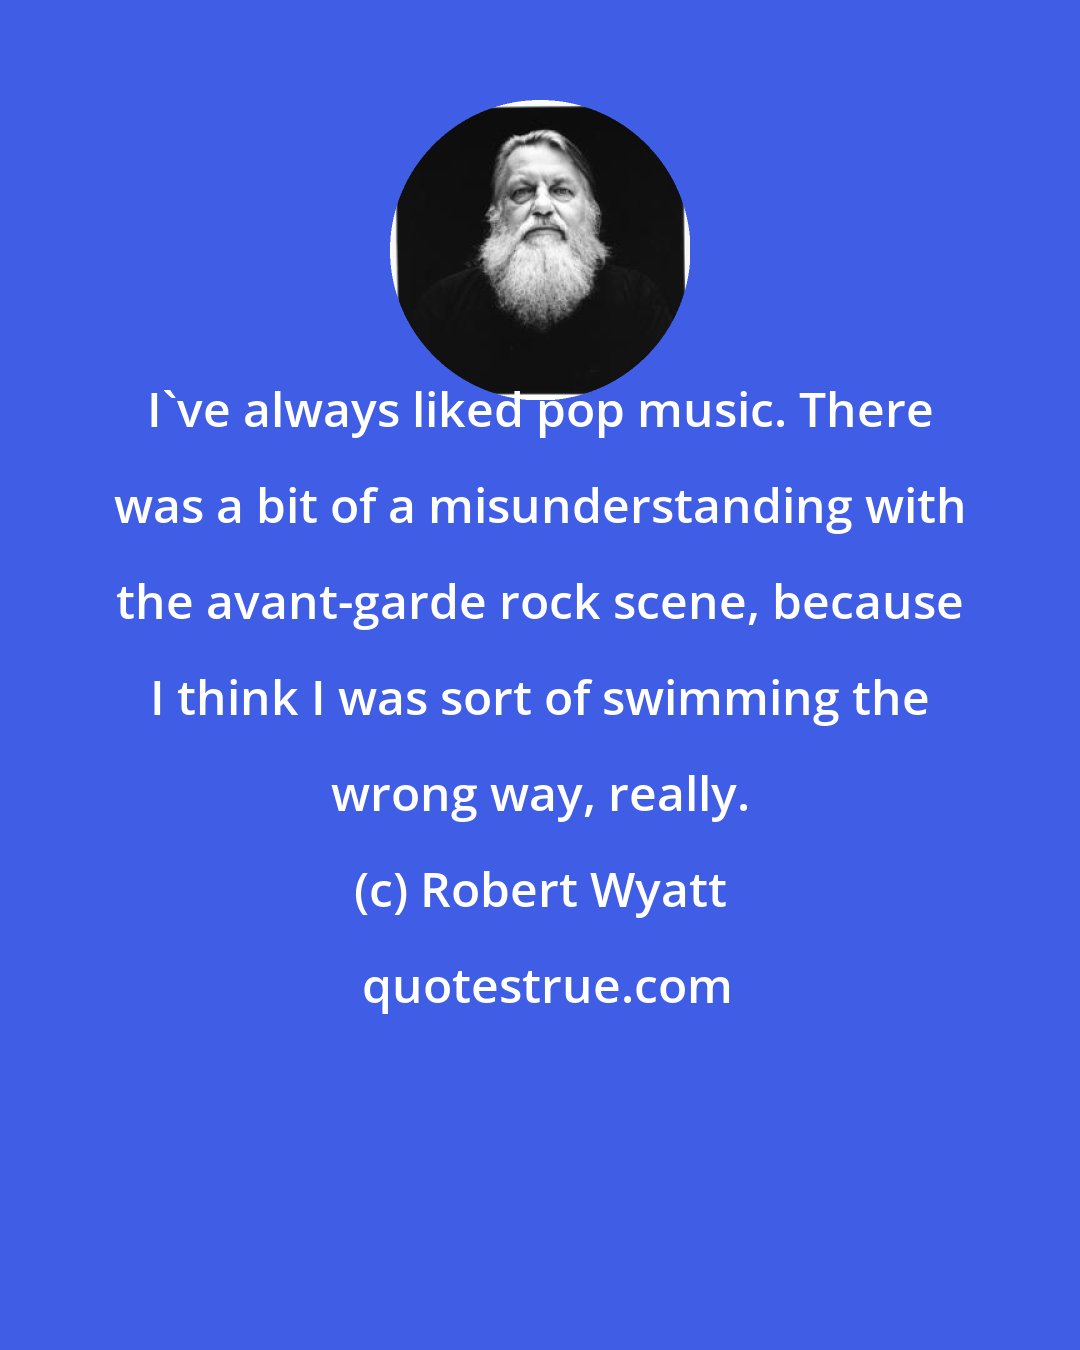 Robert Wyatt: I've always liked pop music. There was a bit of a misunderstanding with the avant-garde rock scene, because I think I was sort of swimming the wrong way, really.